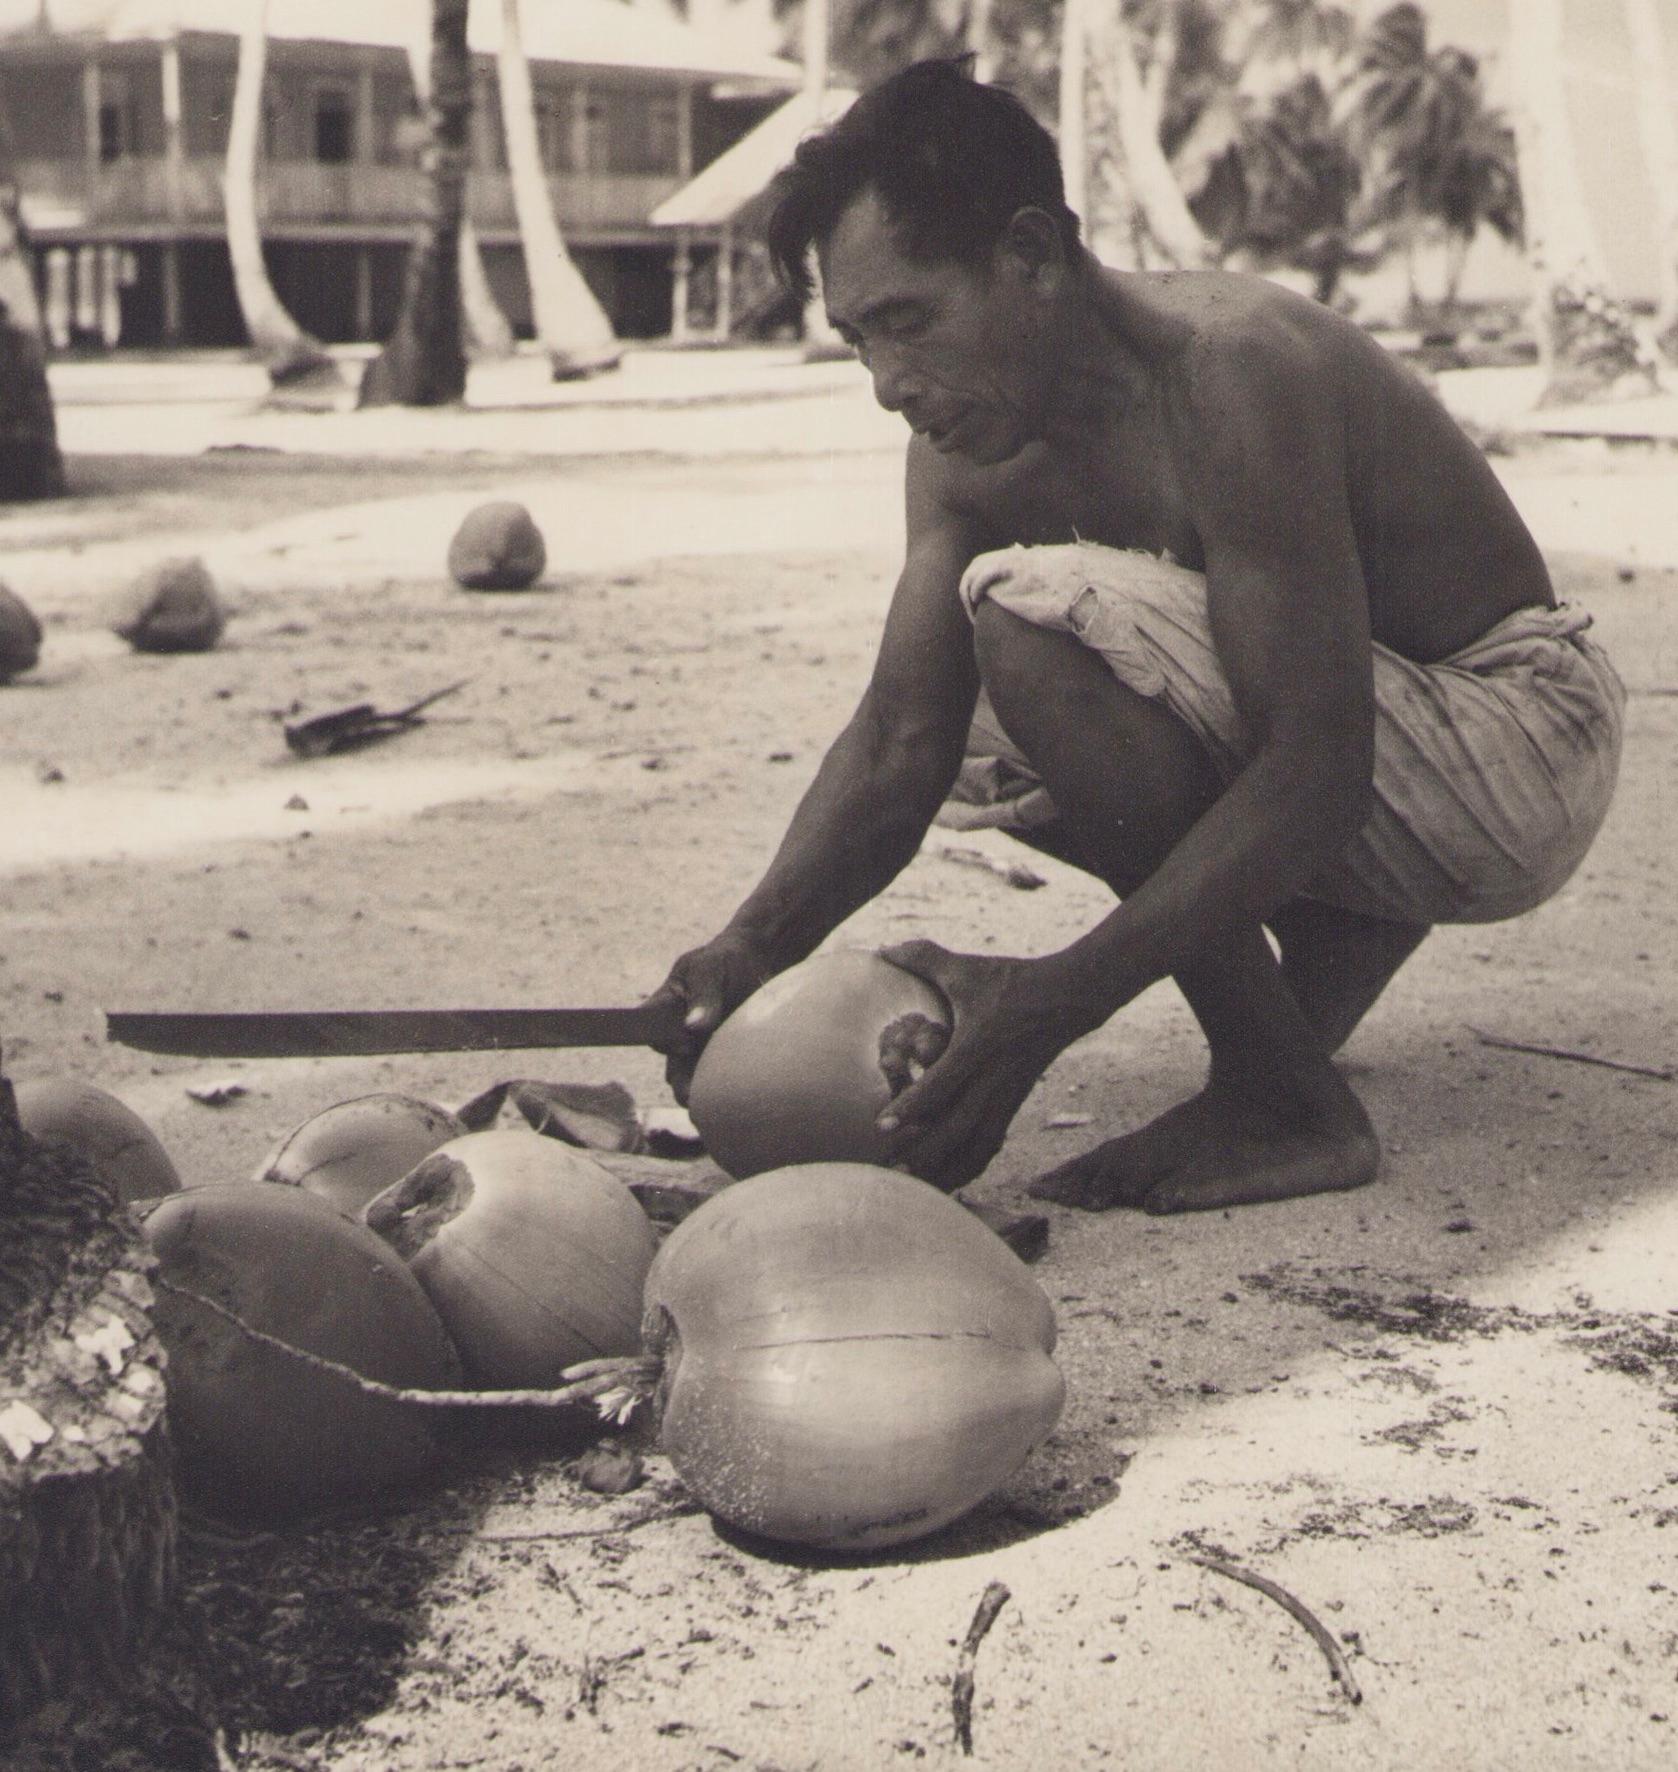 Panama, Man, Coconut, Black and White Photography, 1960s, 23, 2 x 17, 2 cm For Sale 1